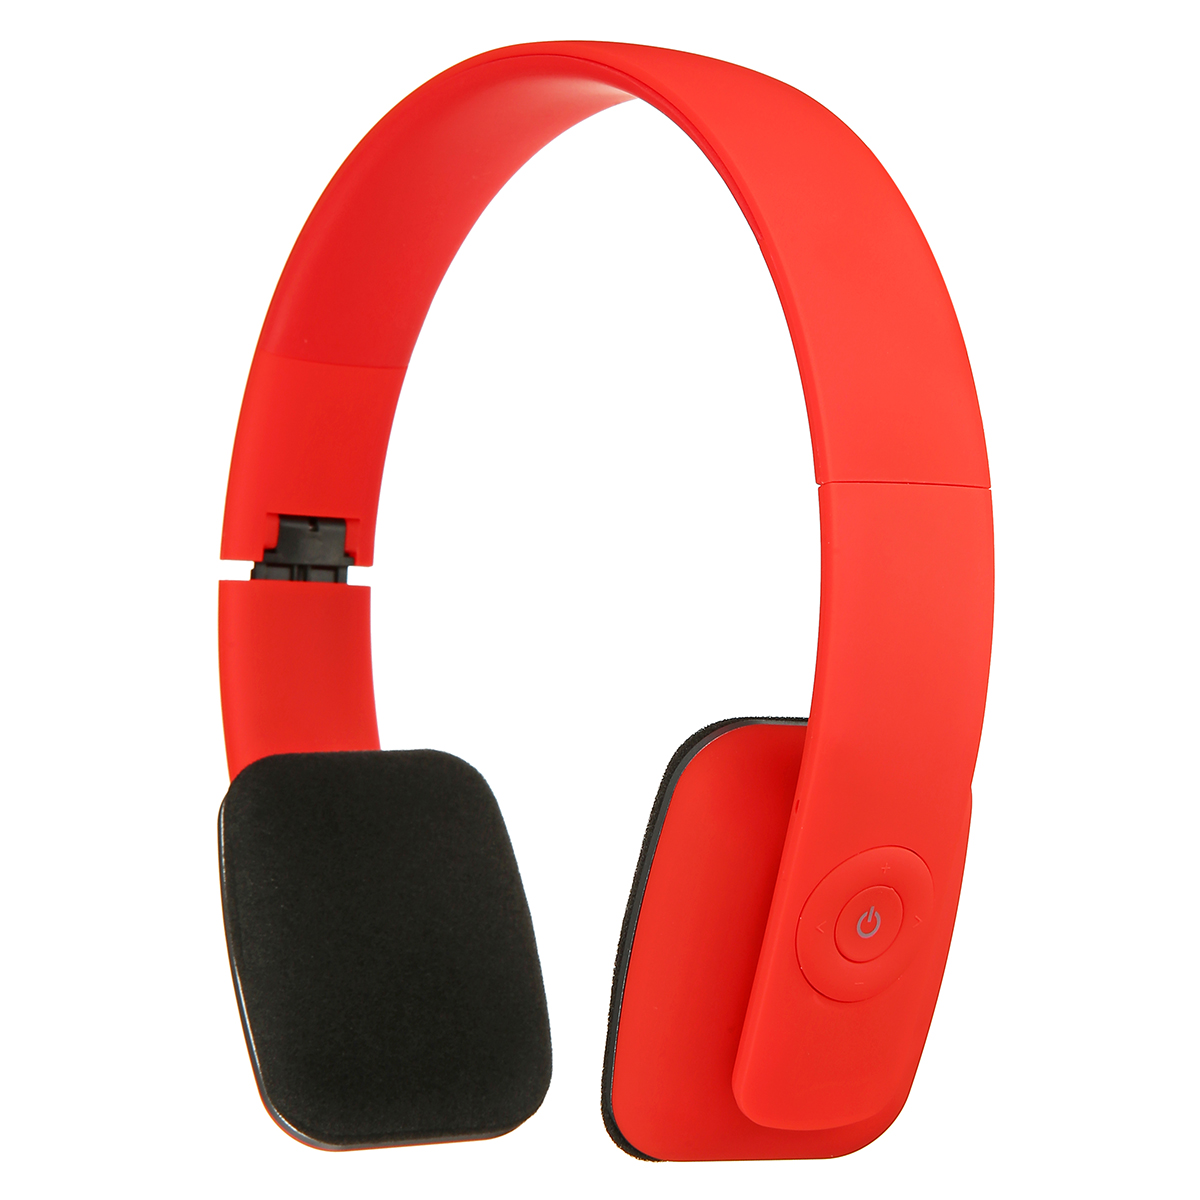 

Wireless Stereo Headphone Foldable bluetooth Sport Hifi Noise Cancelling Over-ear Headset With Mic